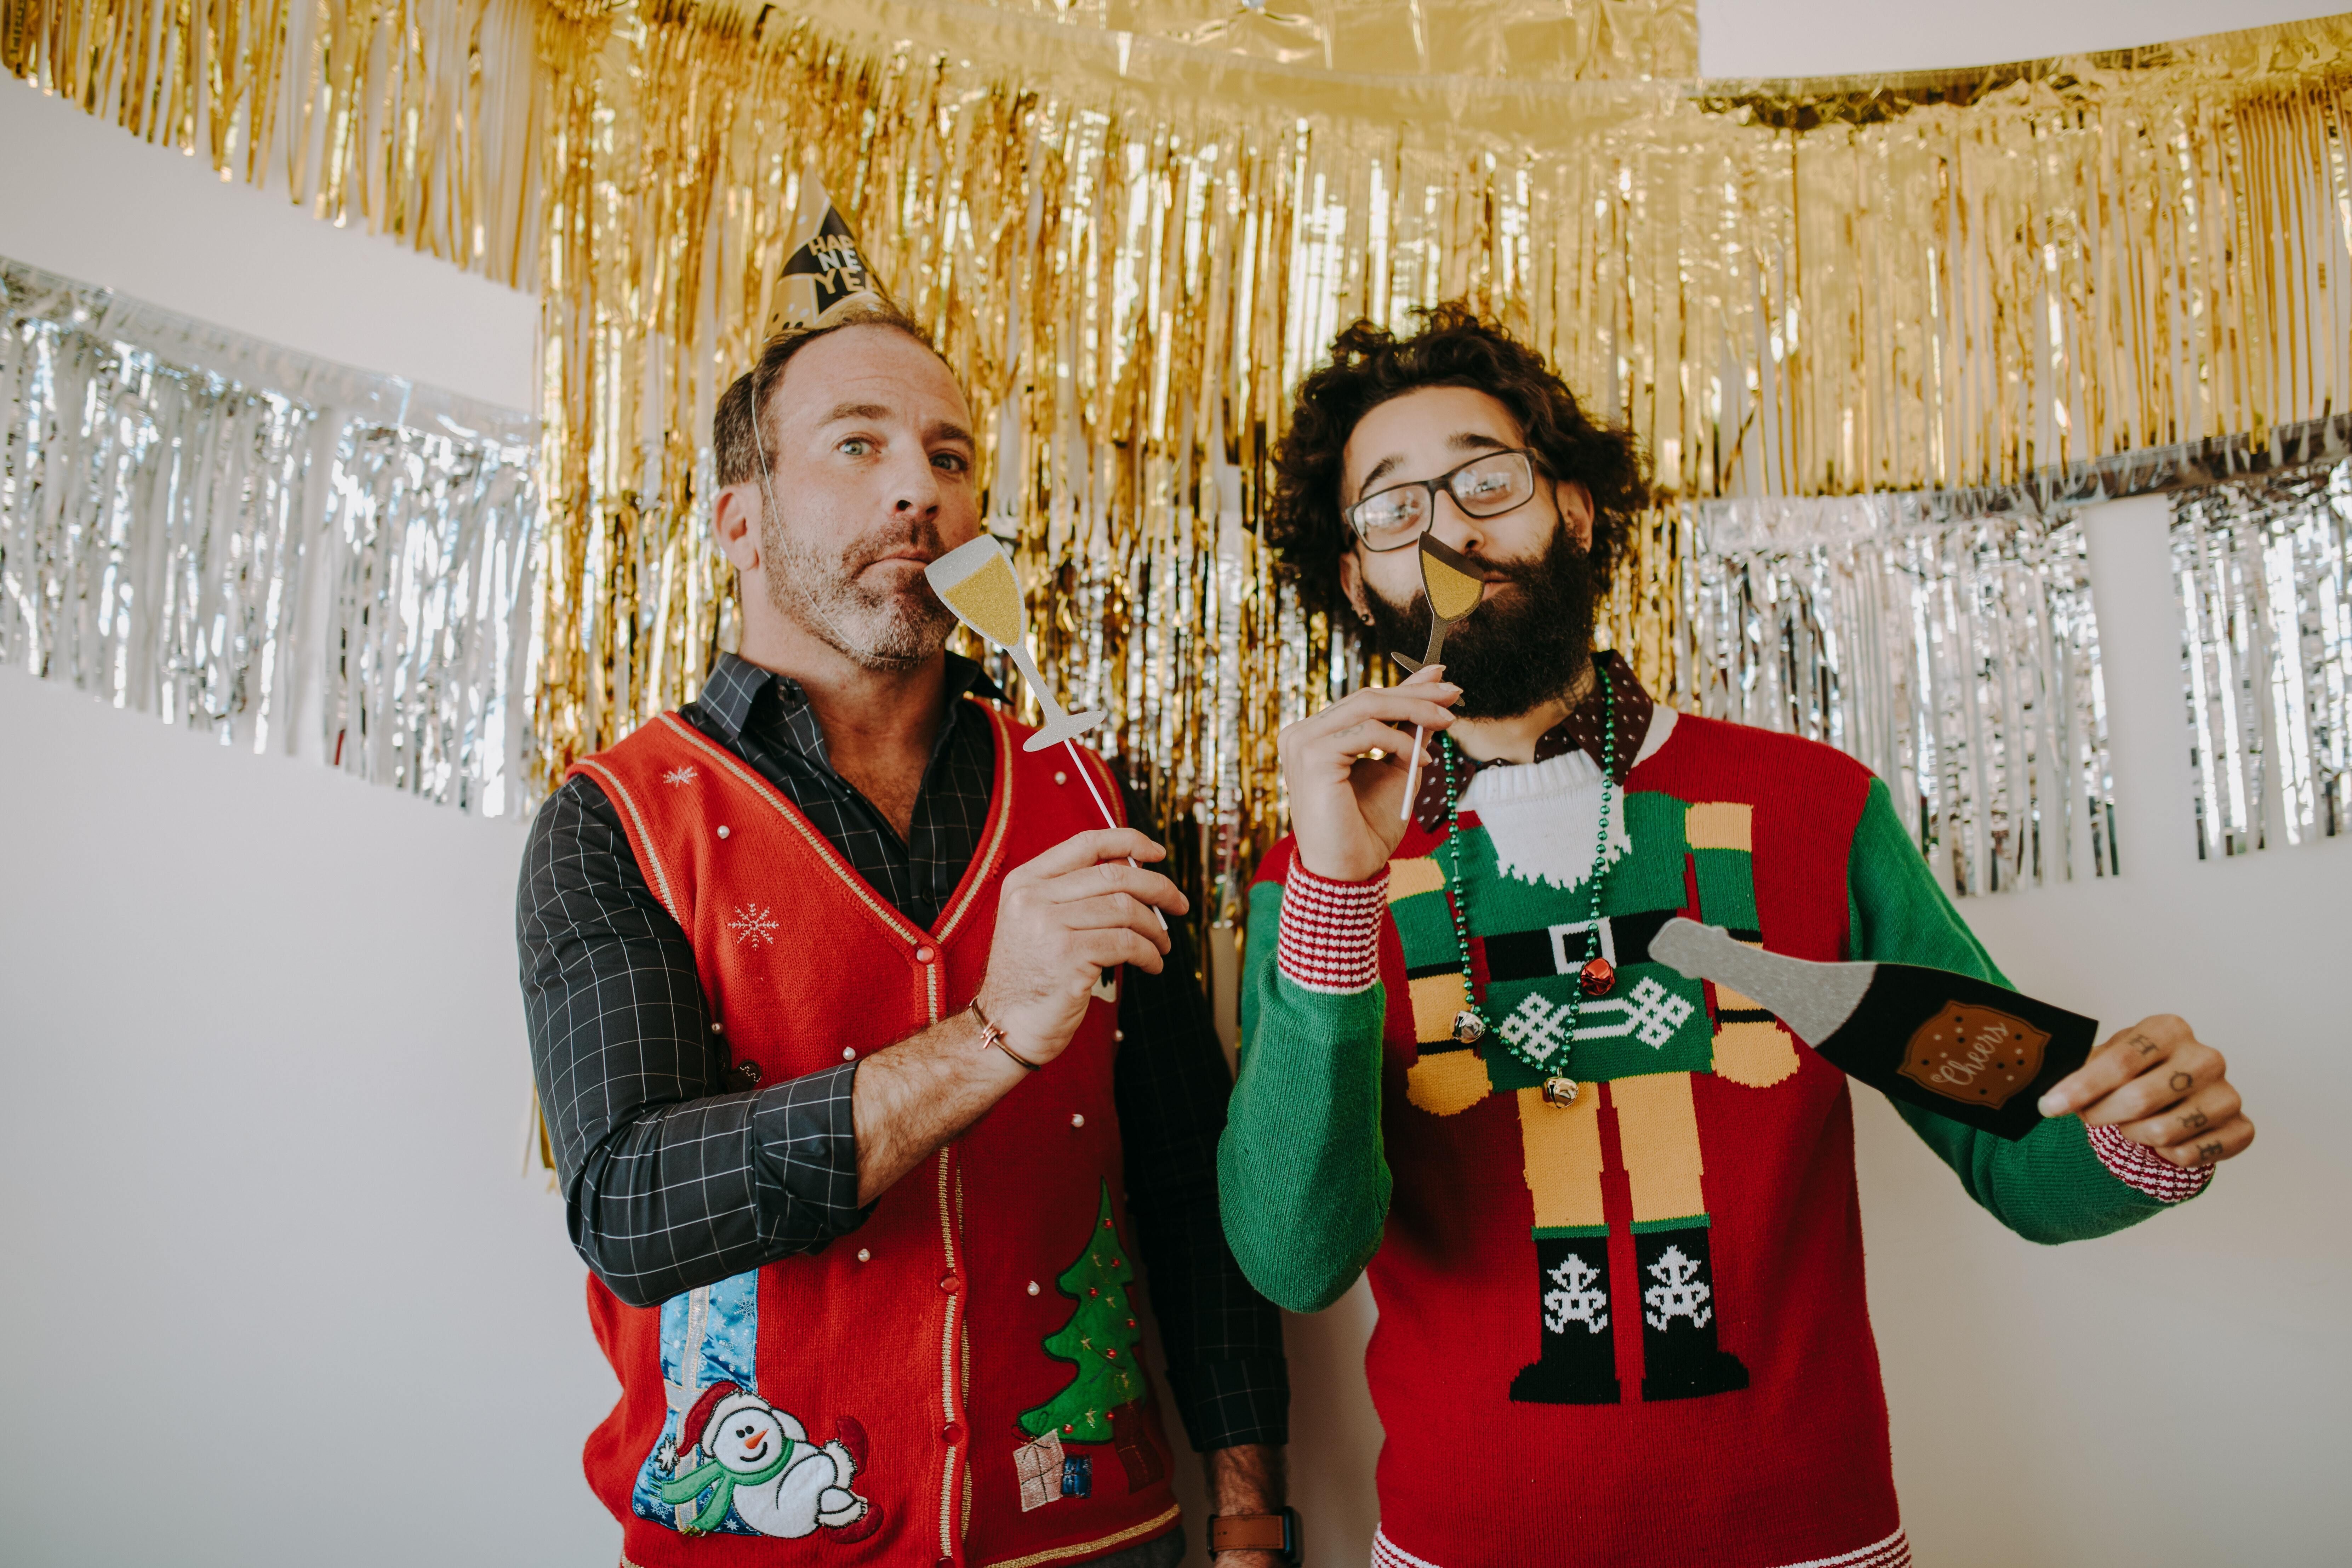 Join us at the Tacky Sweater and Cookie Swap Holiday Party